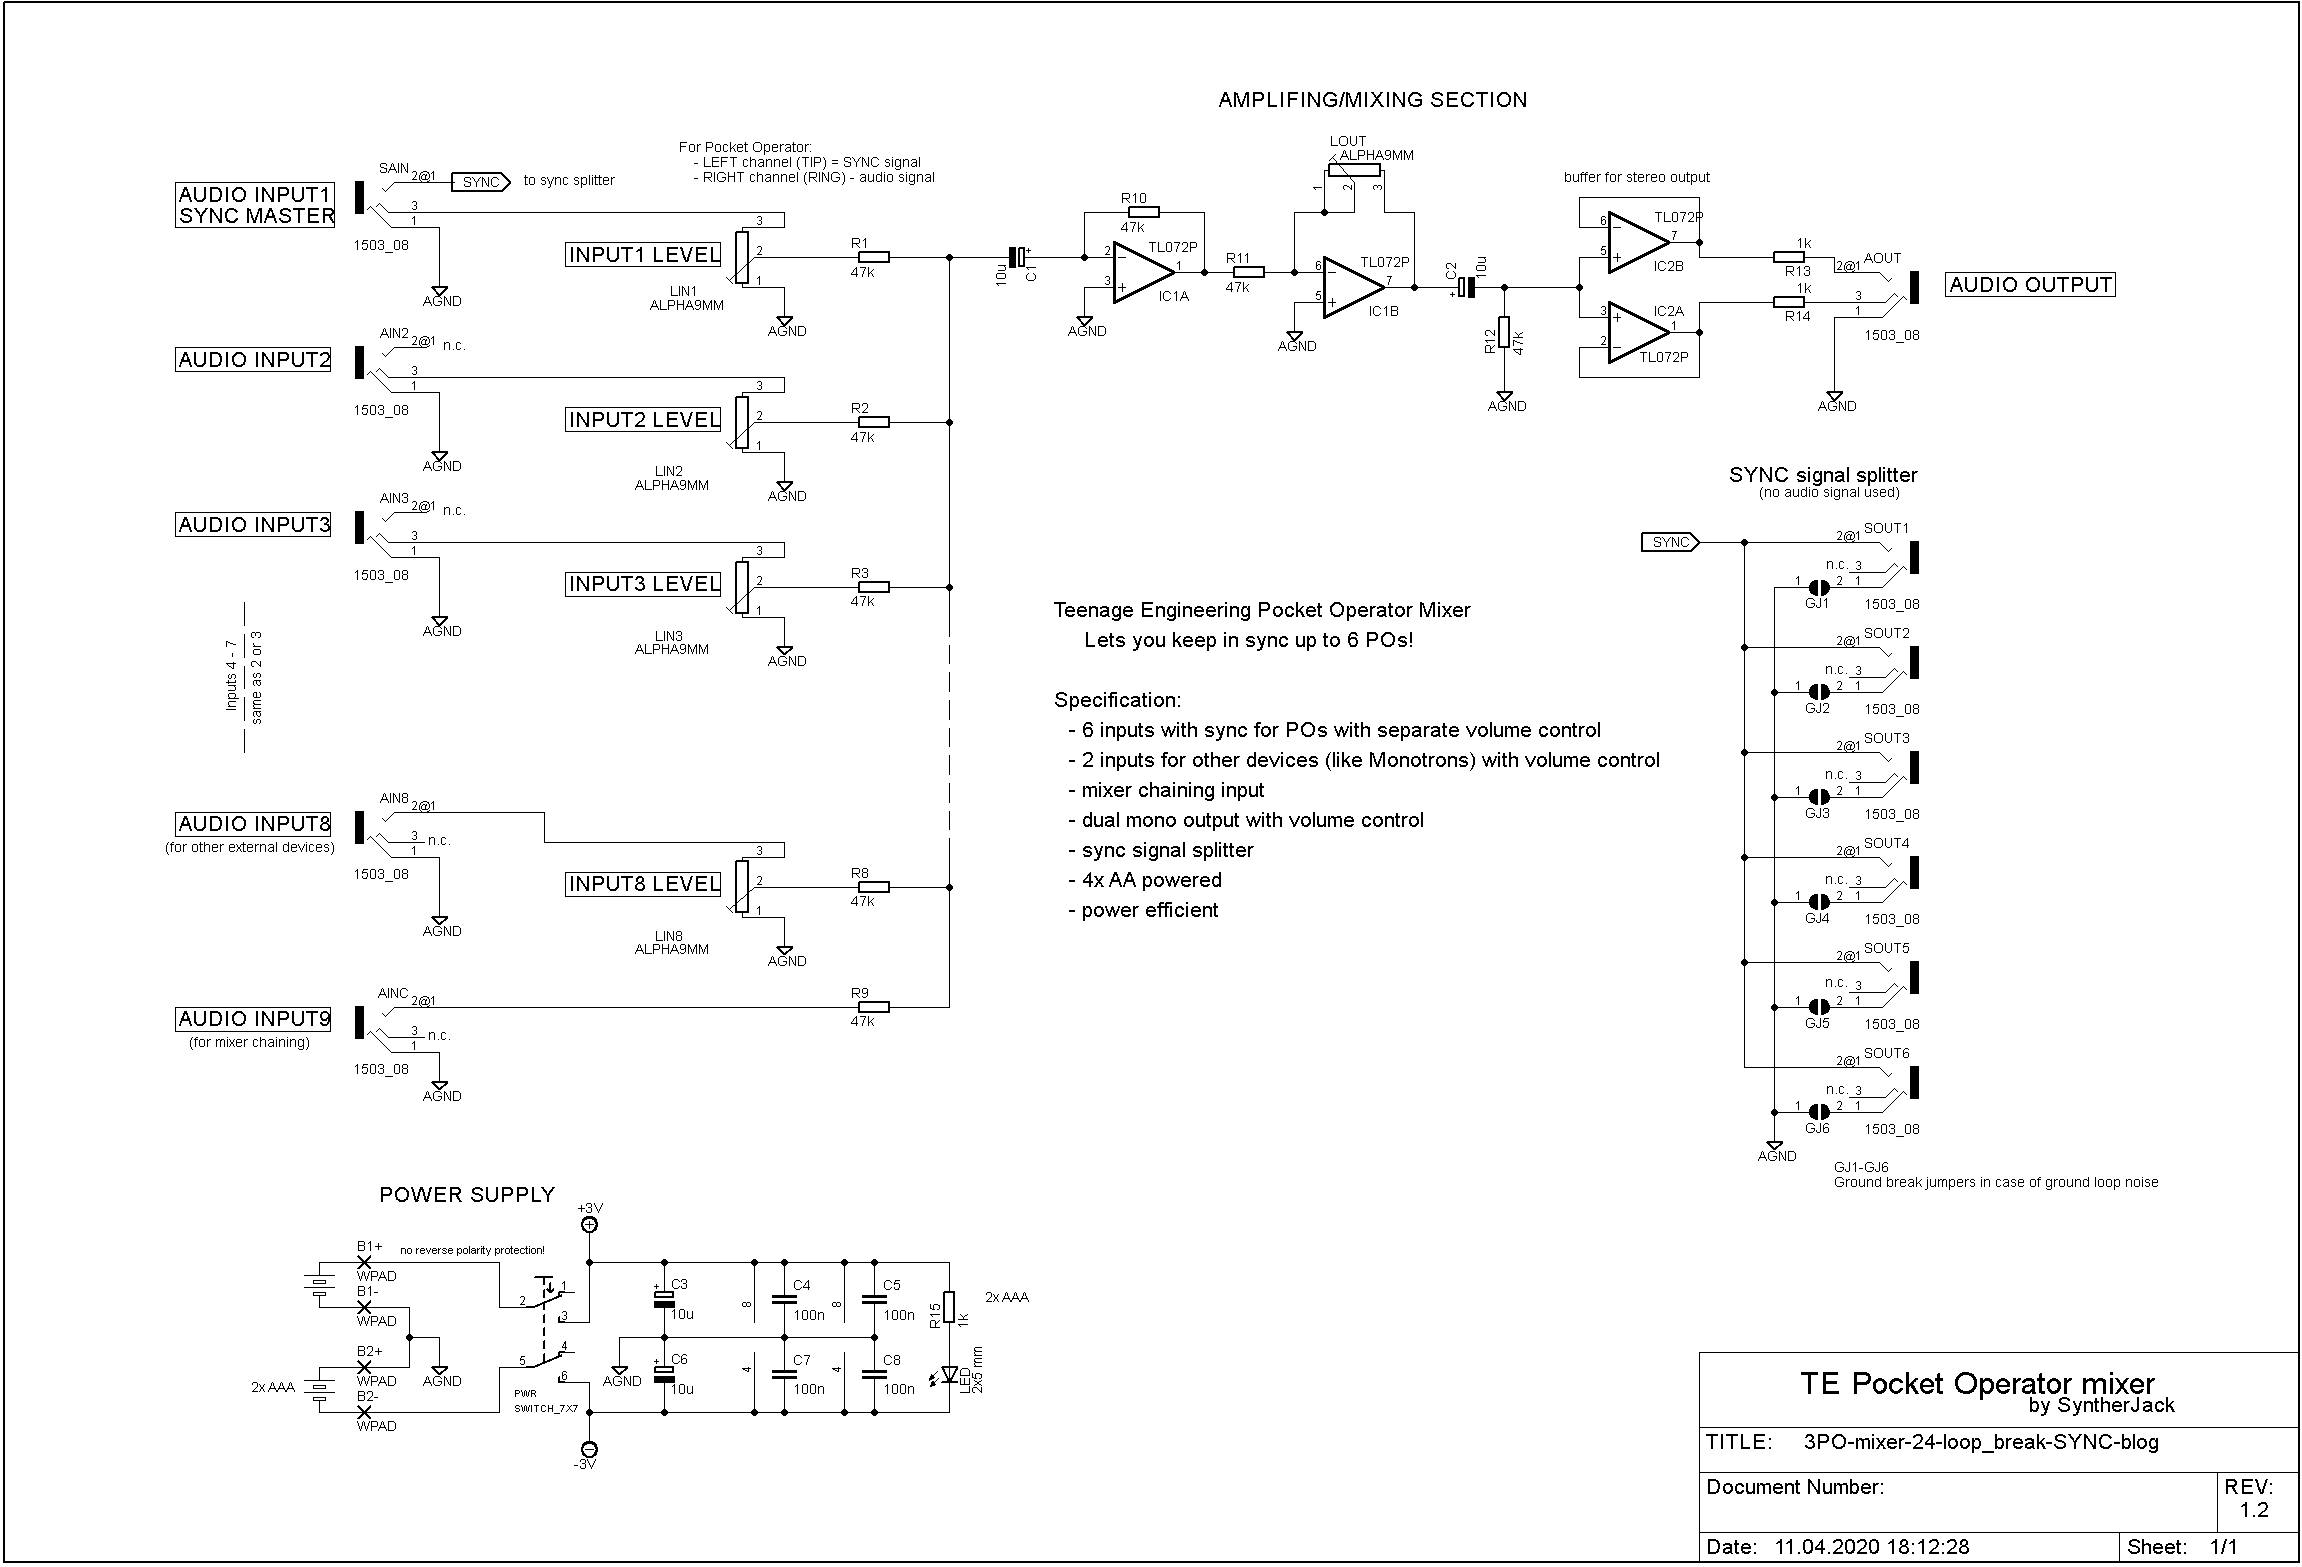 Schematic od 3PO mixer - nothing fancy here